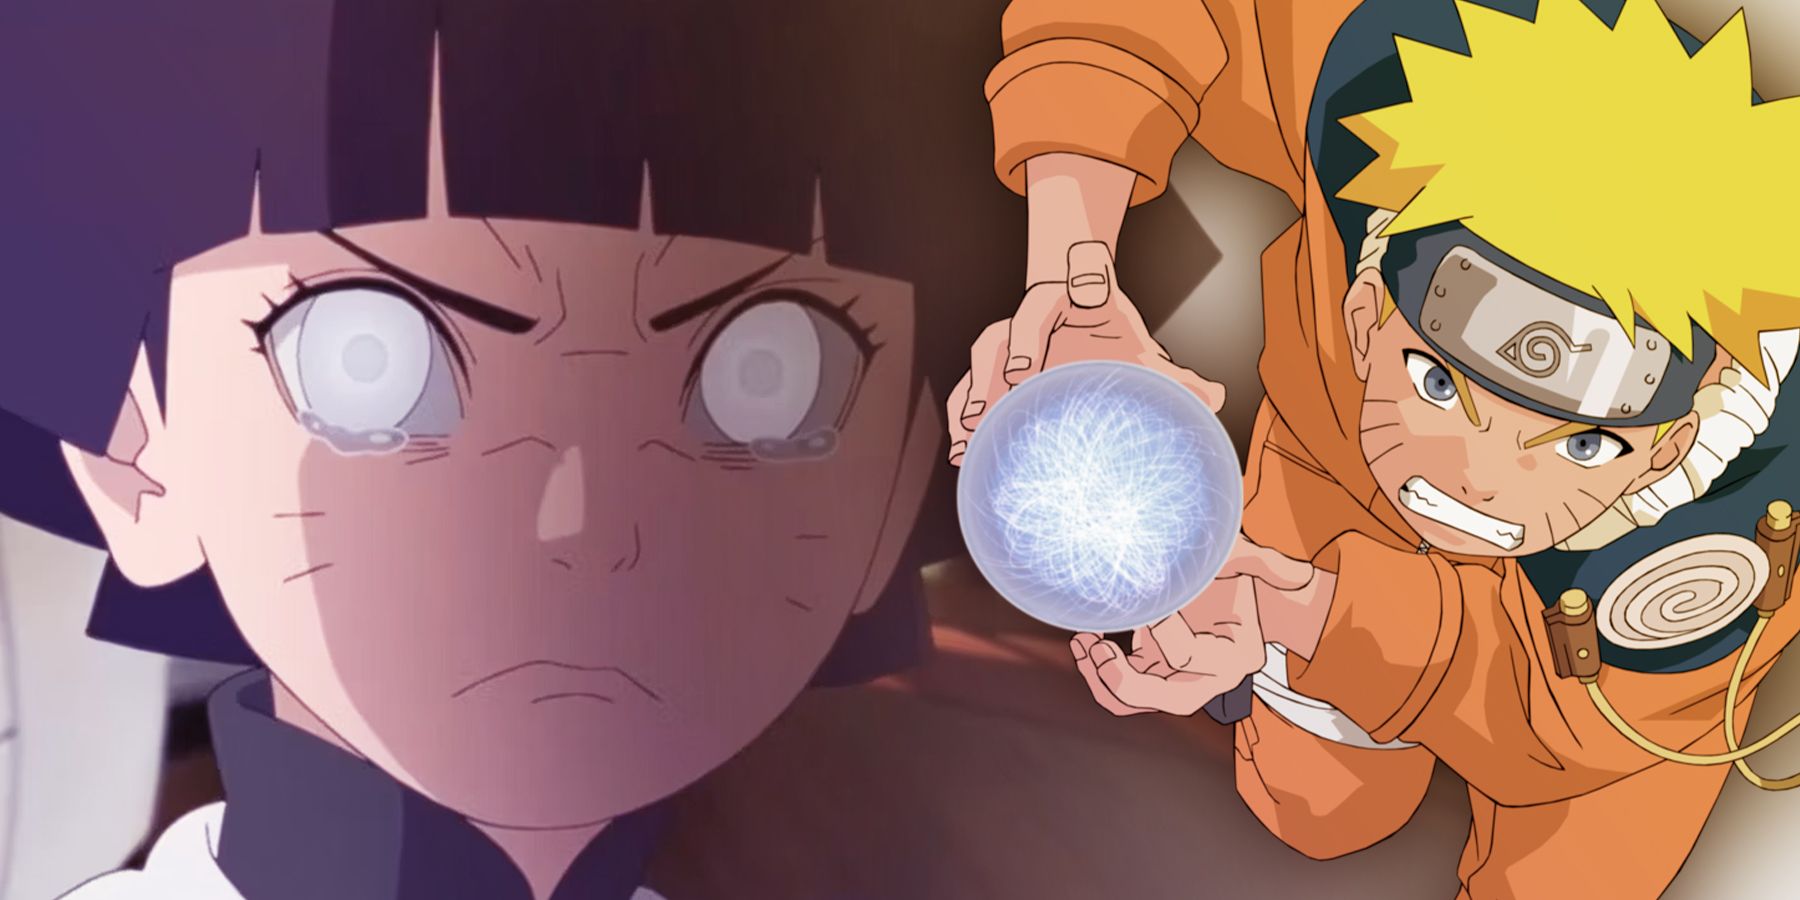 On the left, Himawari Uzumaki frowns with intense teary eyes. On the right, a young Naruto charges forward with a rasengan.